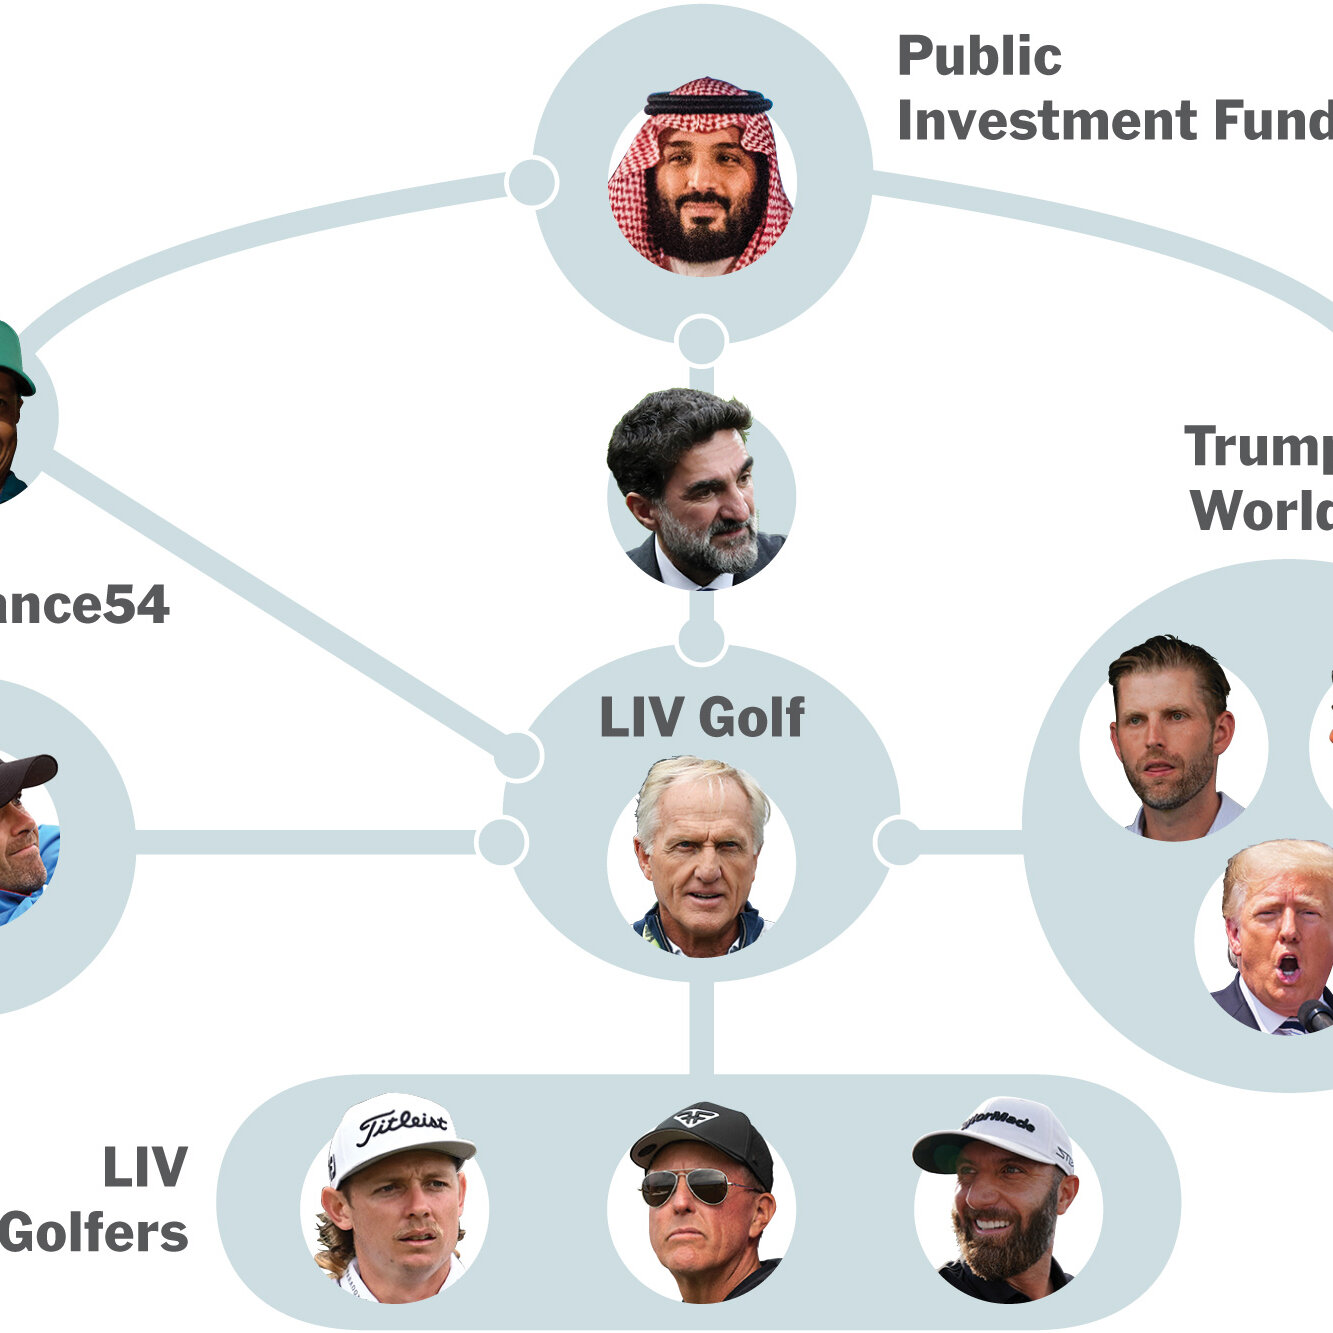 Who Owns Liv Golf Investments